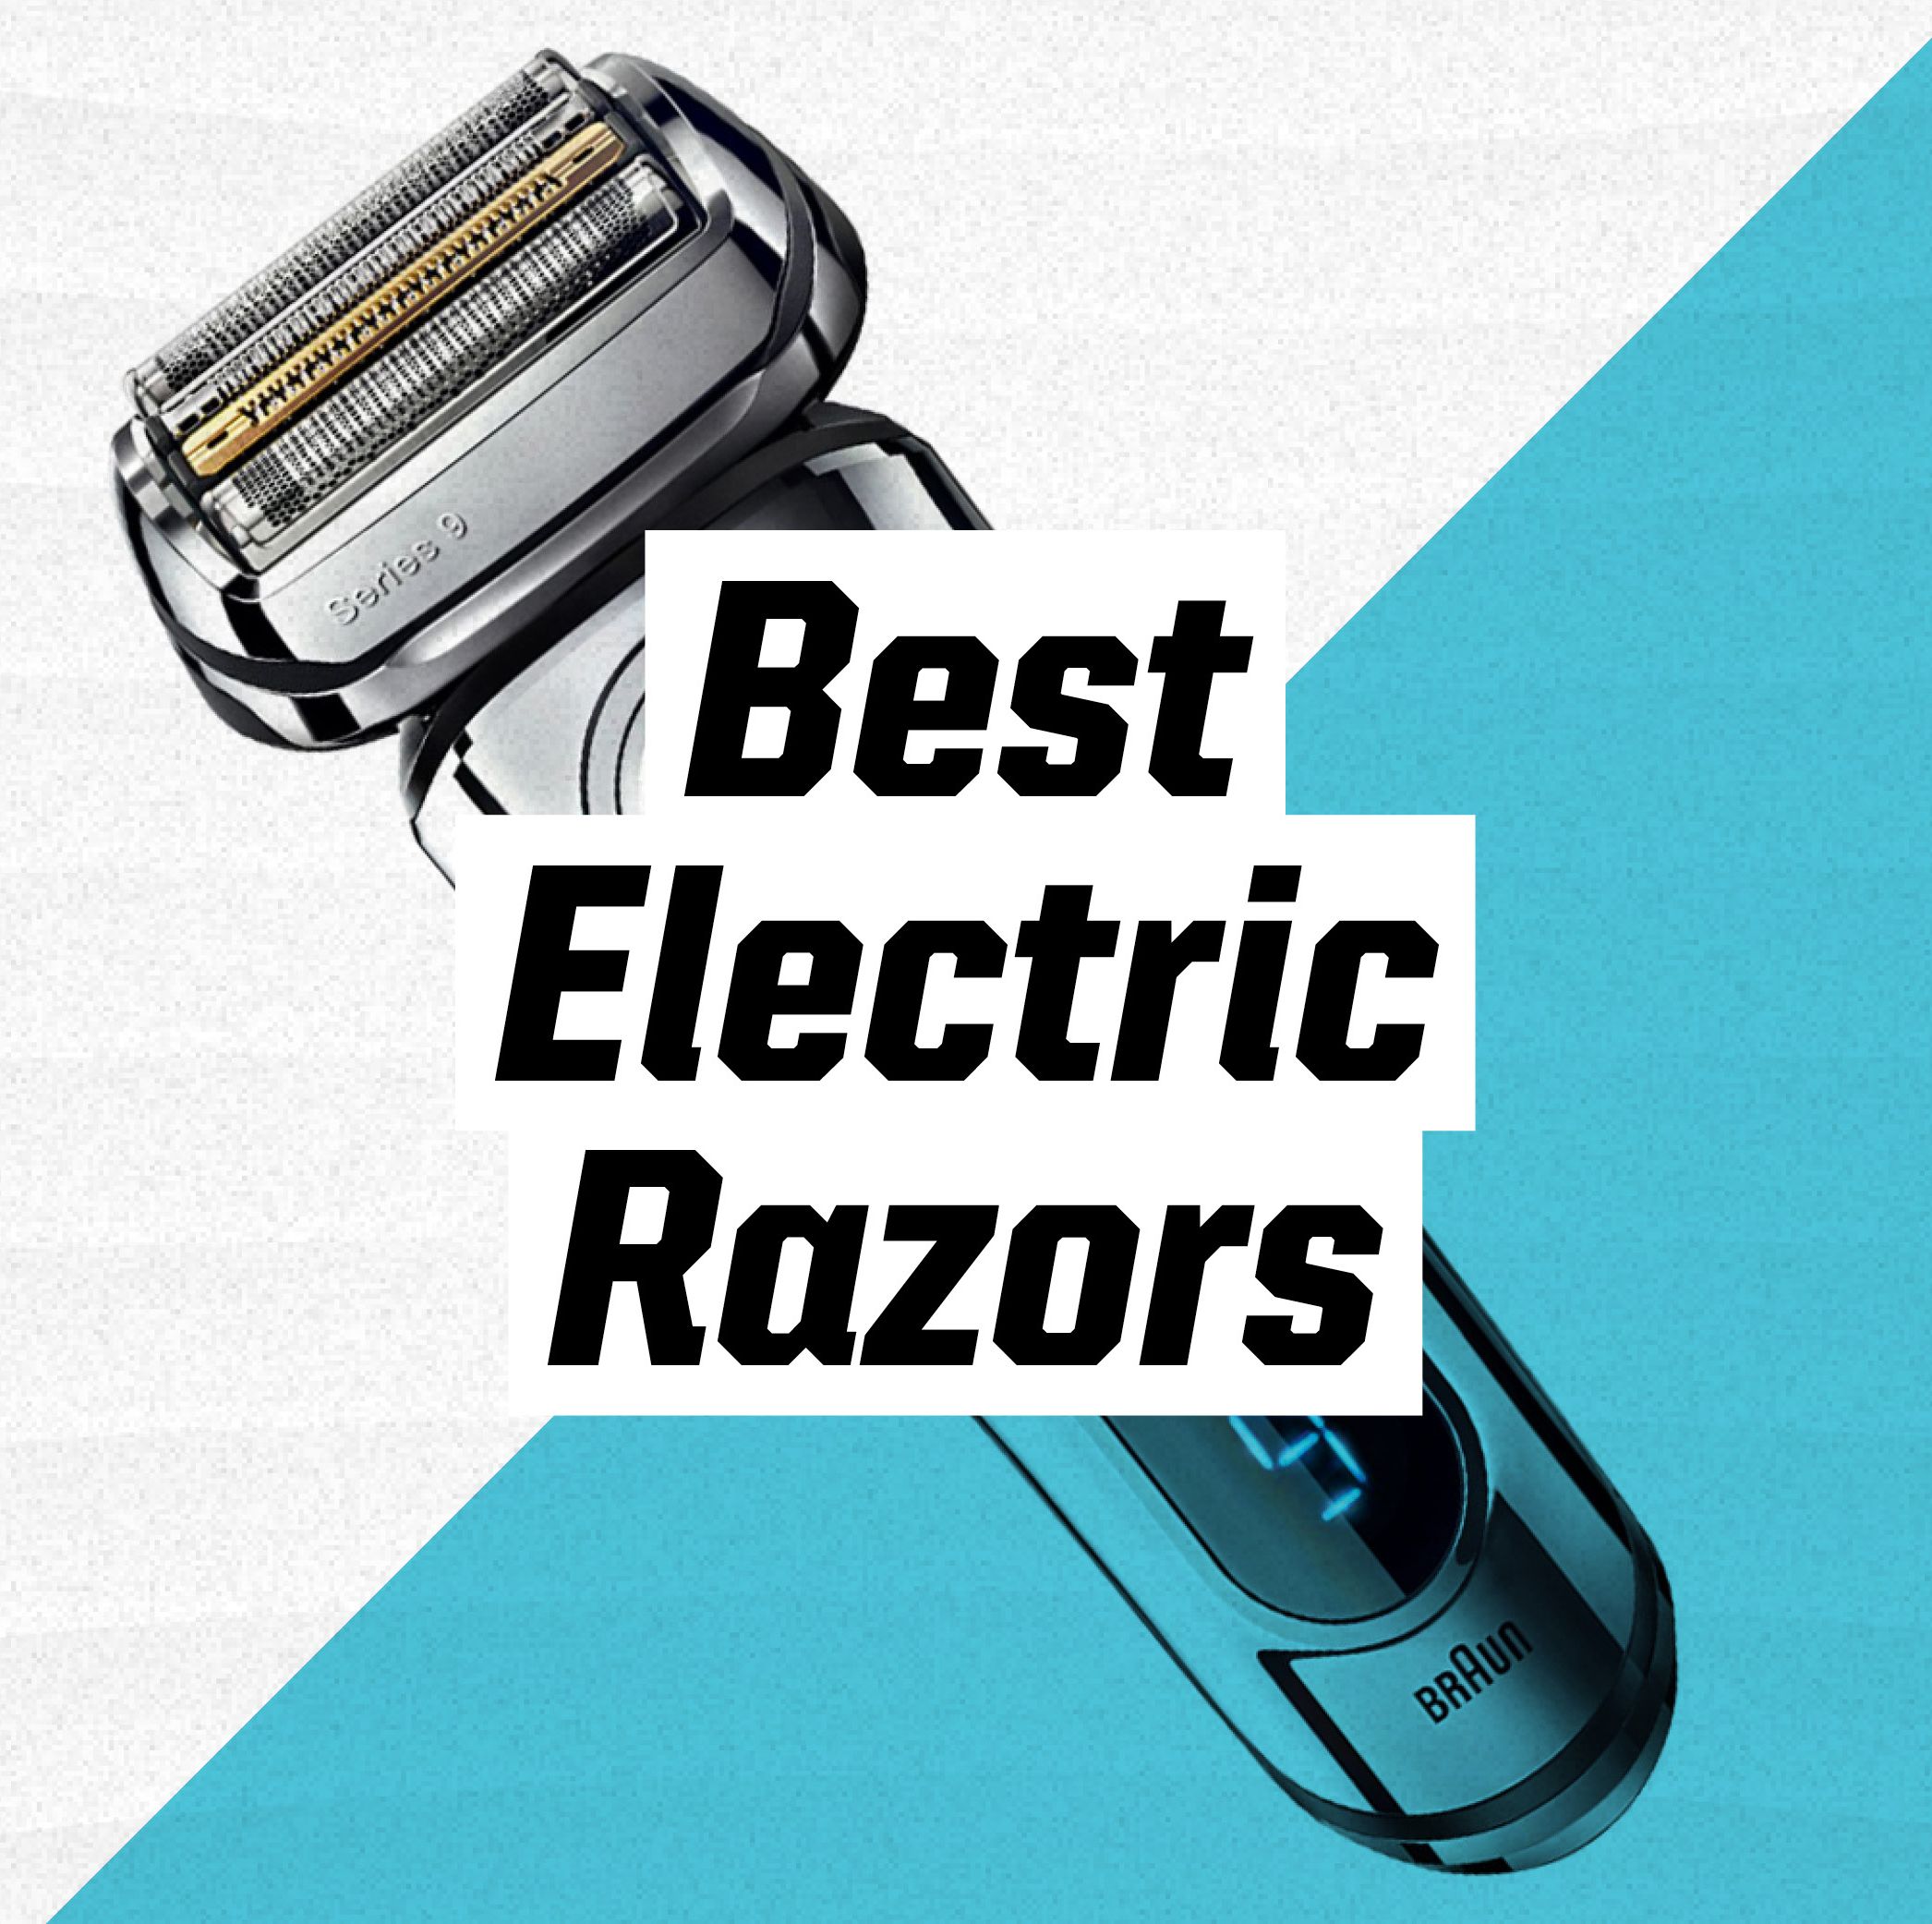 How to Choose the Right Electric Shaver